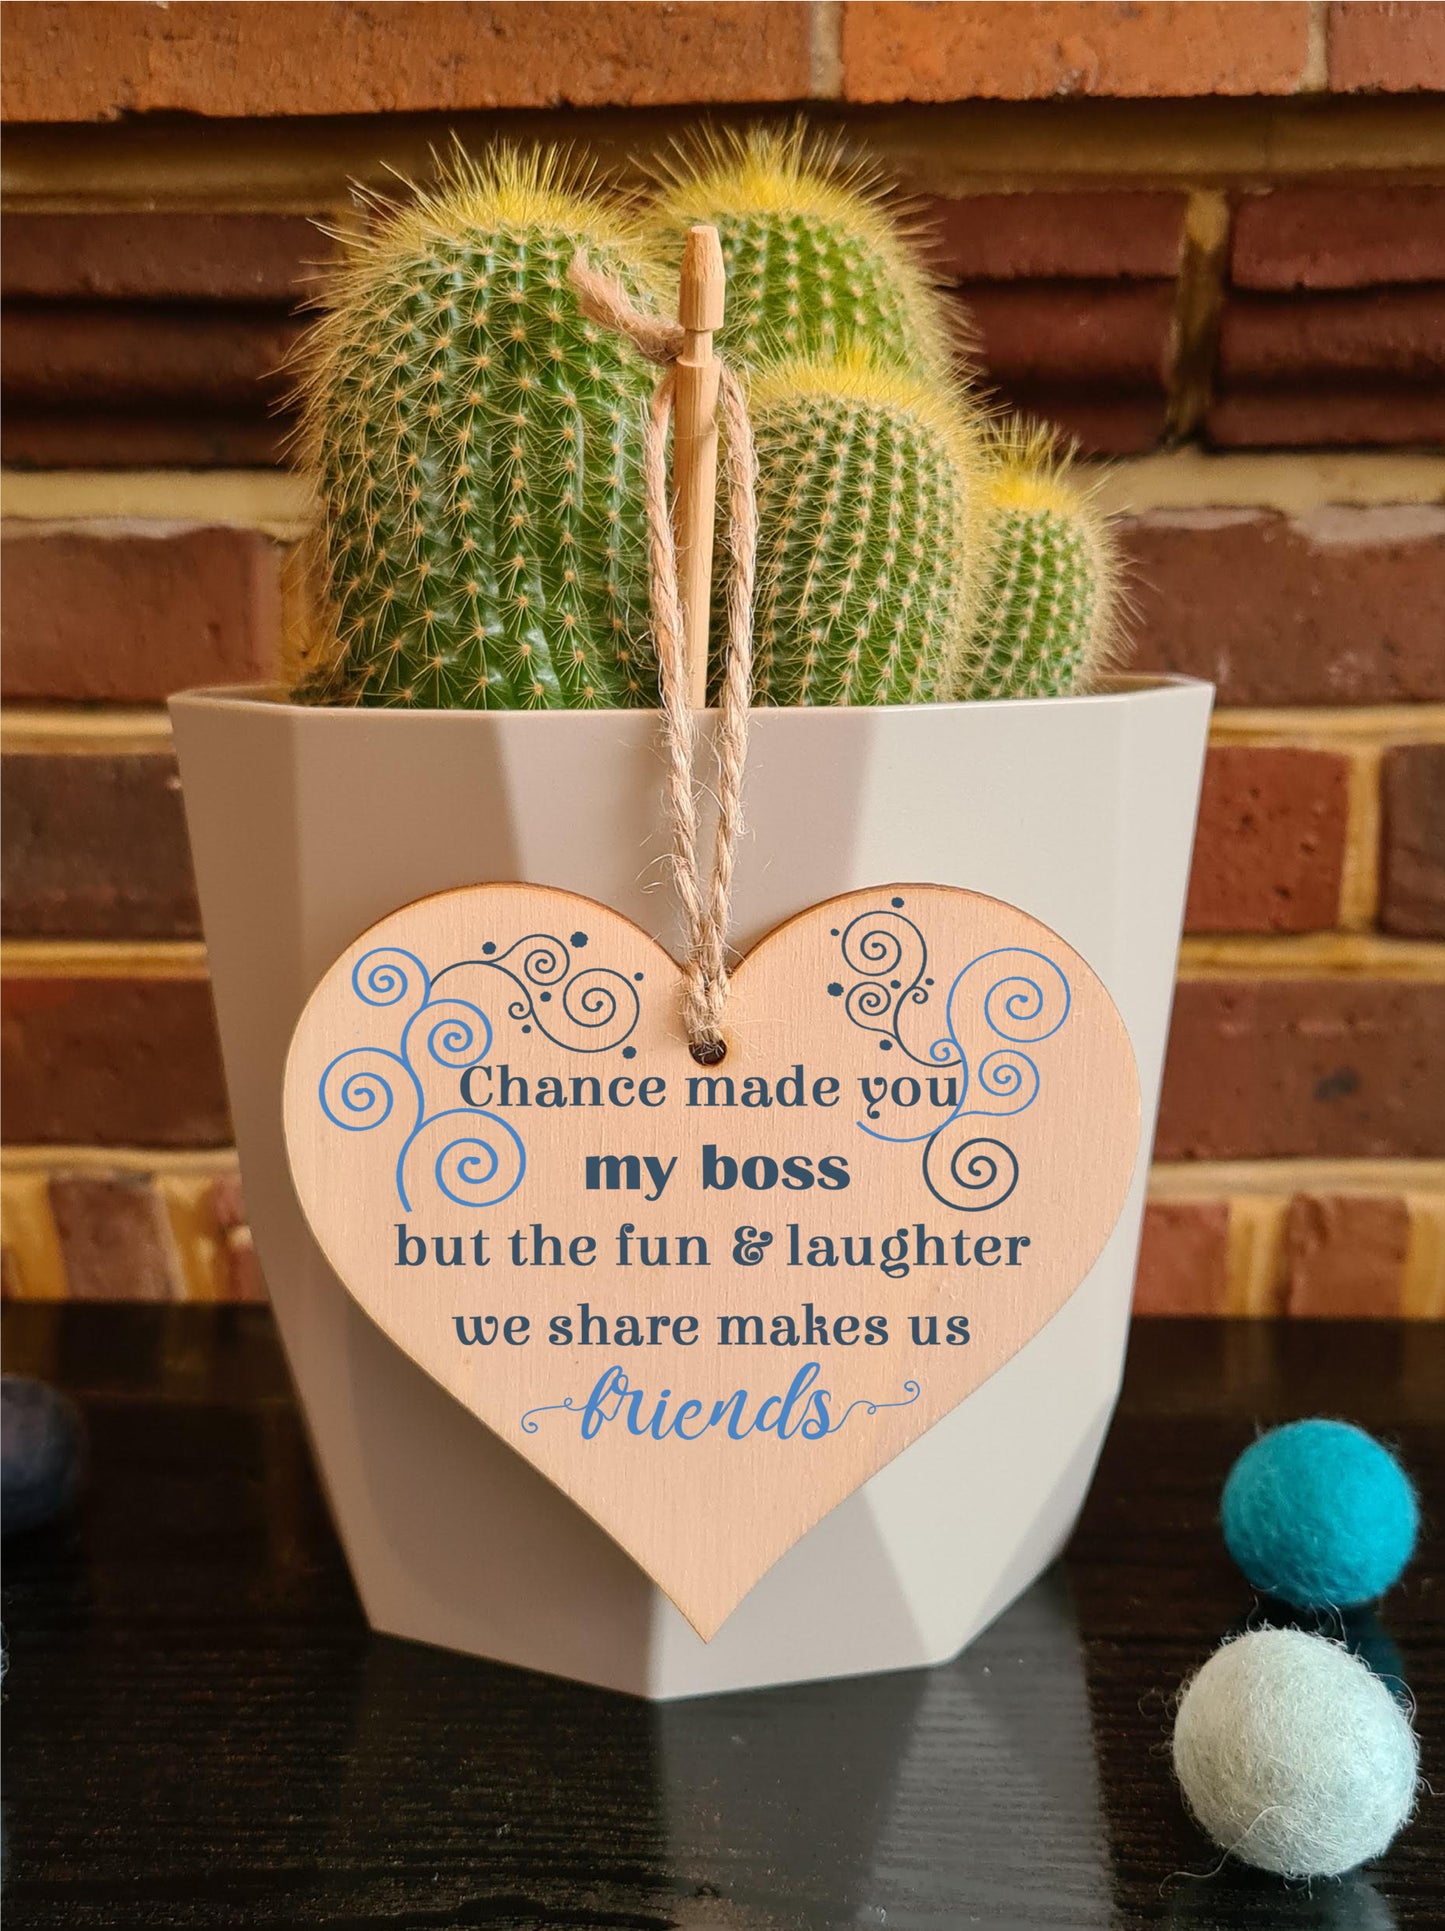 Handmade Wooden Hanging Heart Plaque Gift for your Boss or Manager Keepsake for Friend